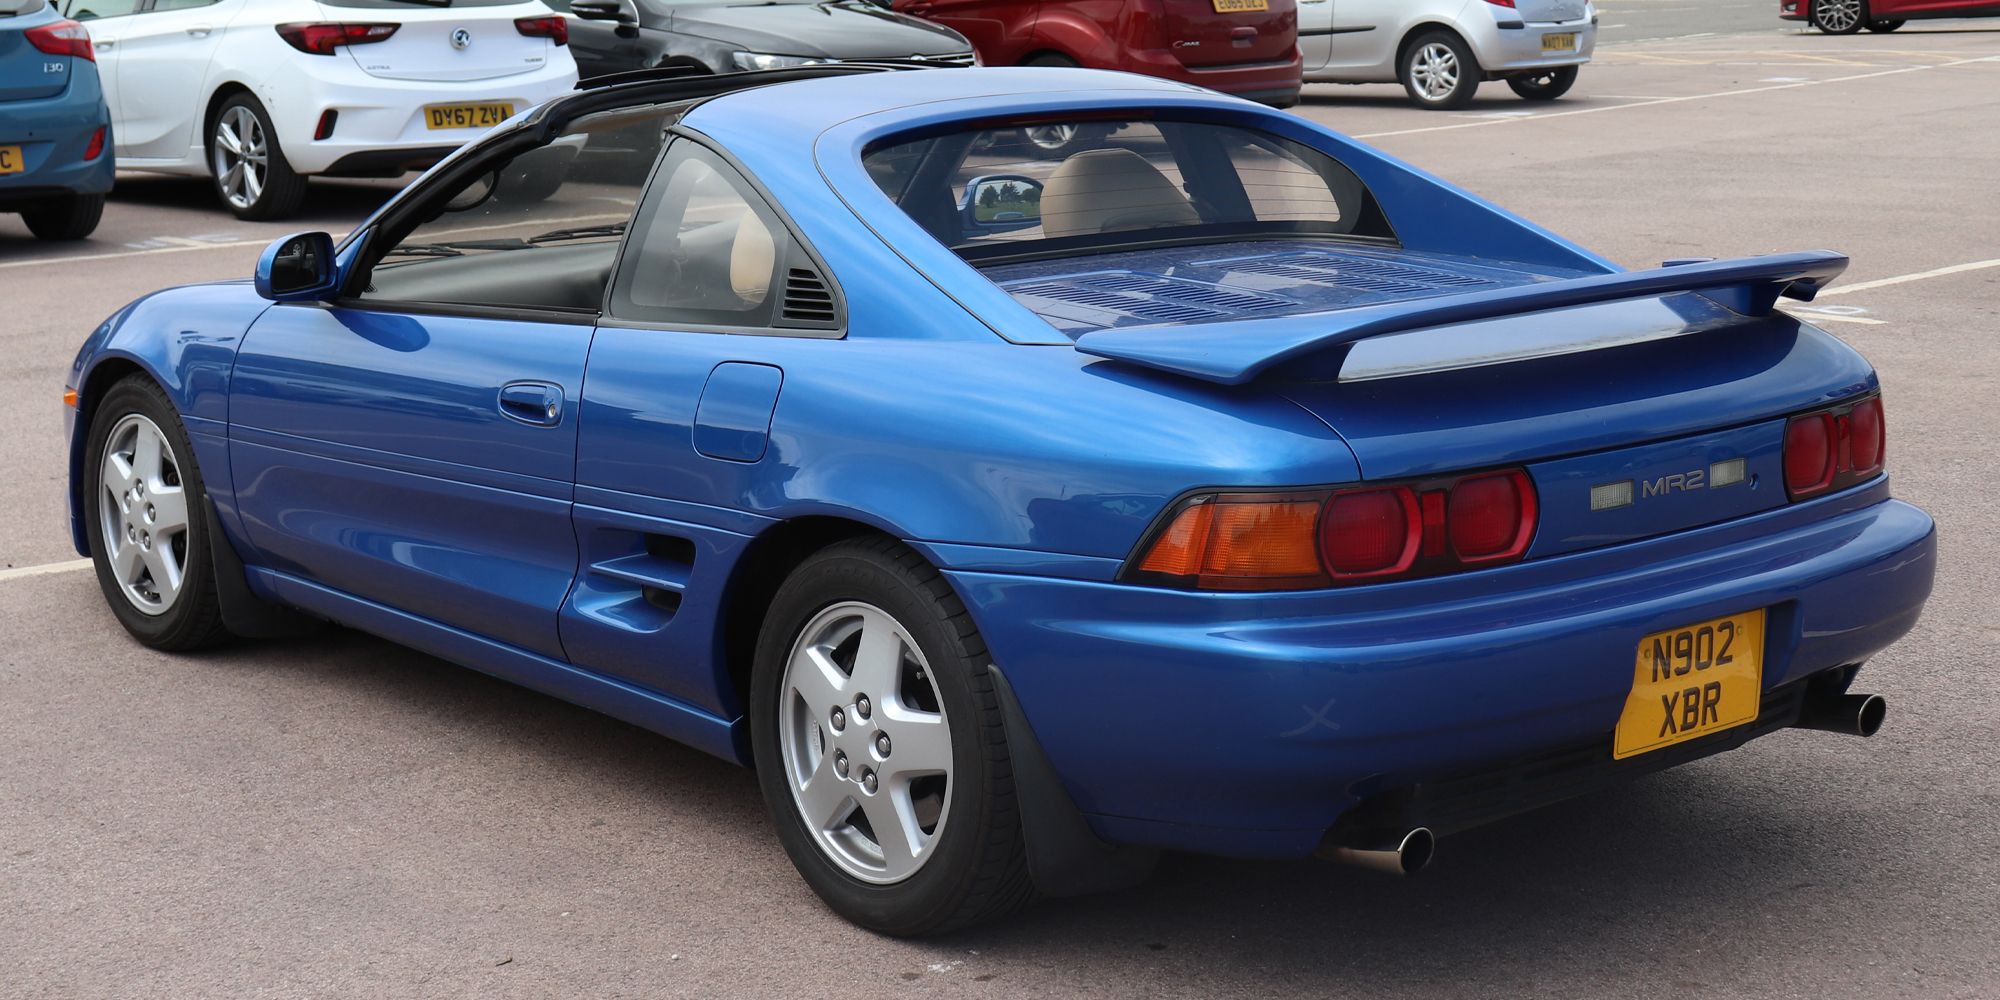 The rear of a blue SW20 MR2